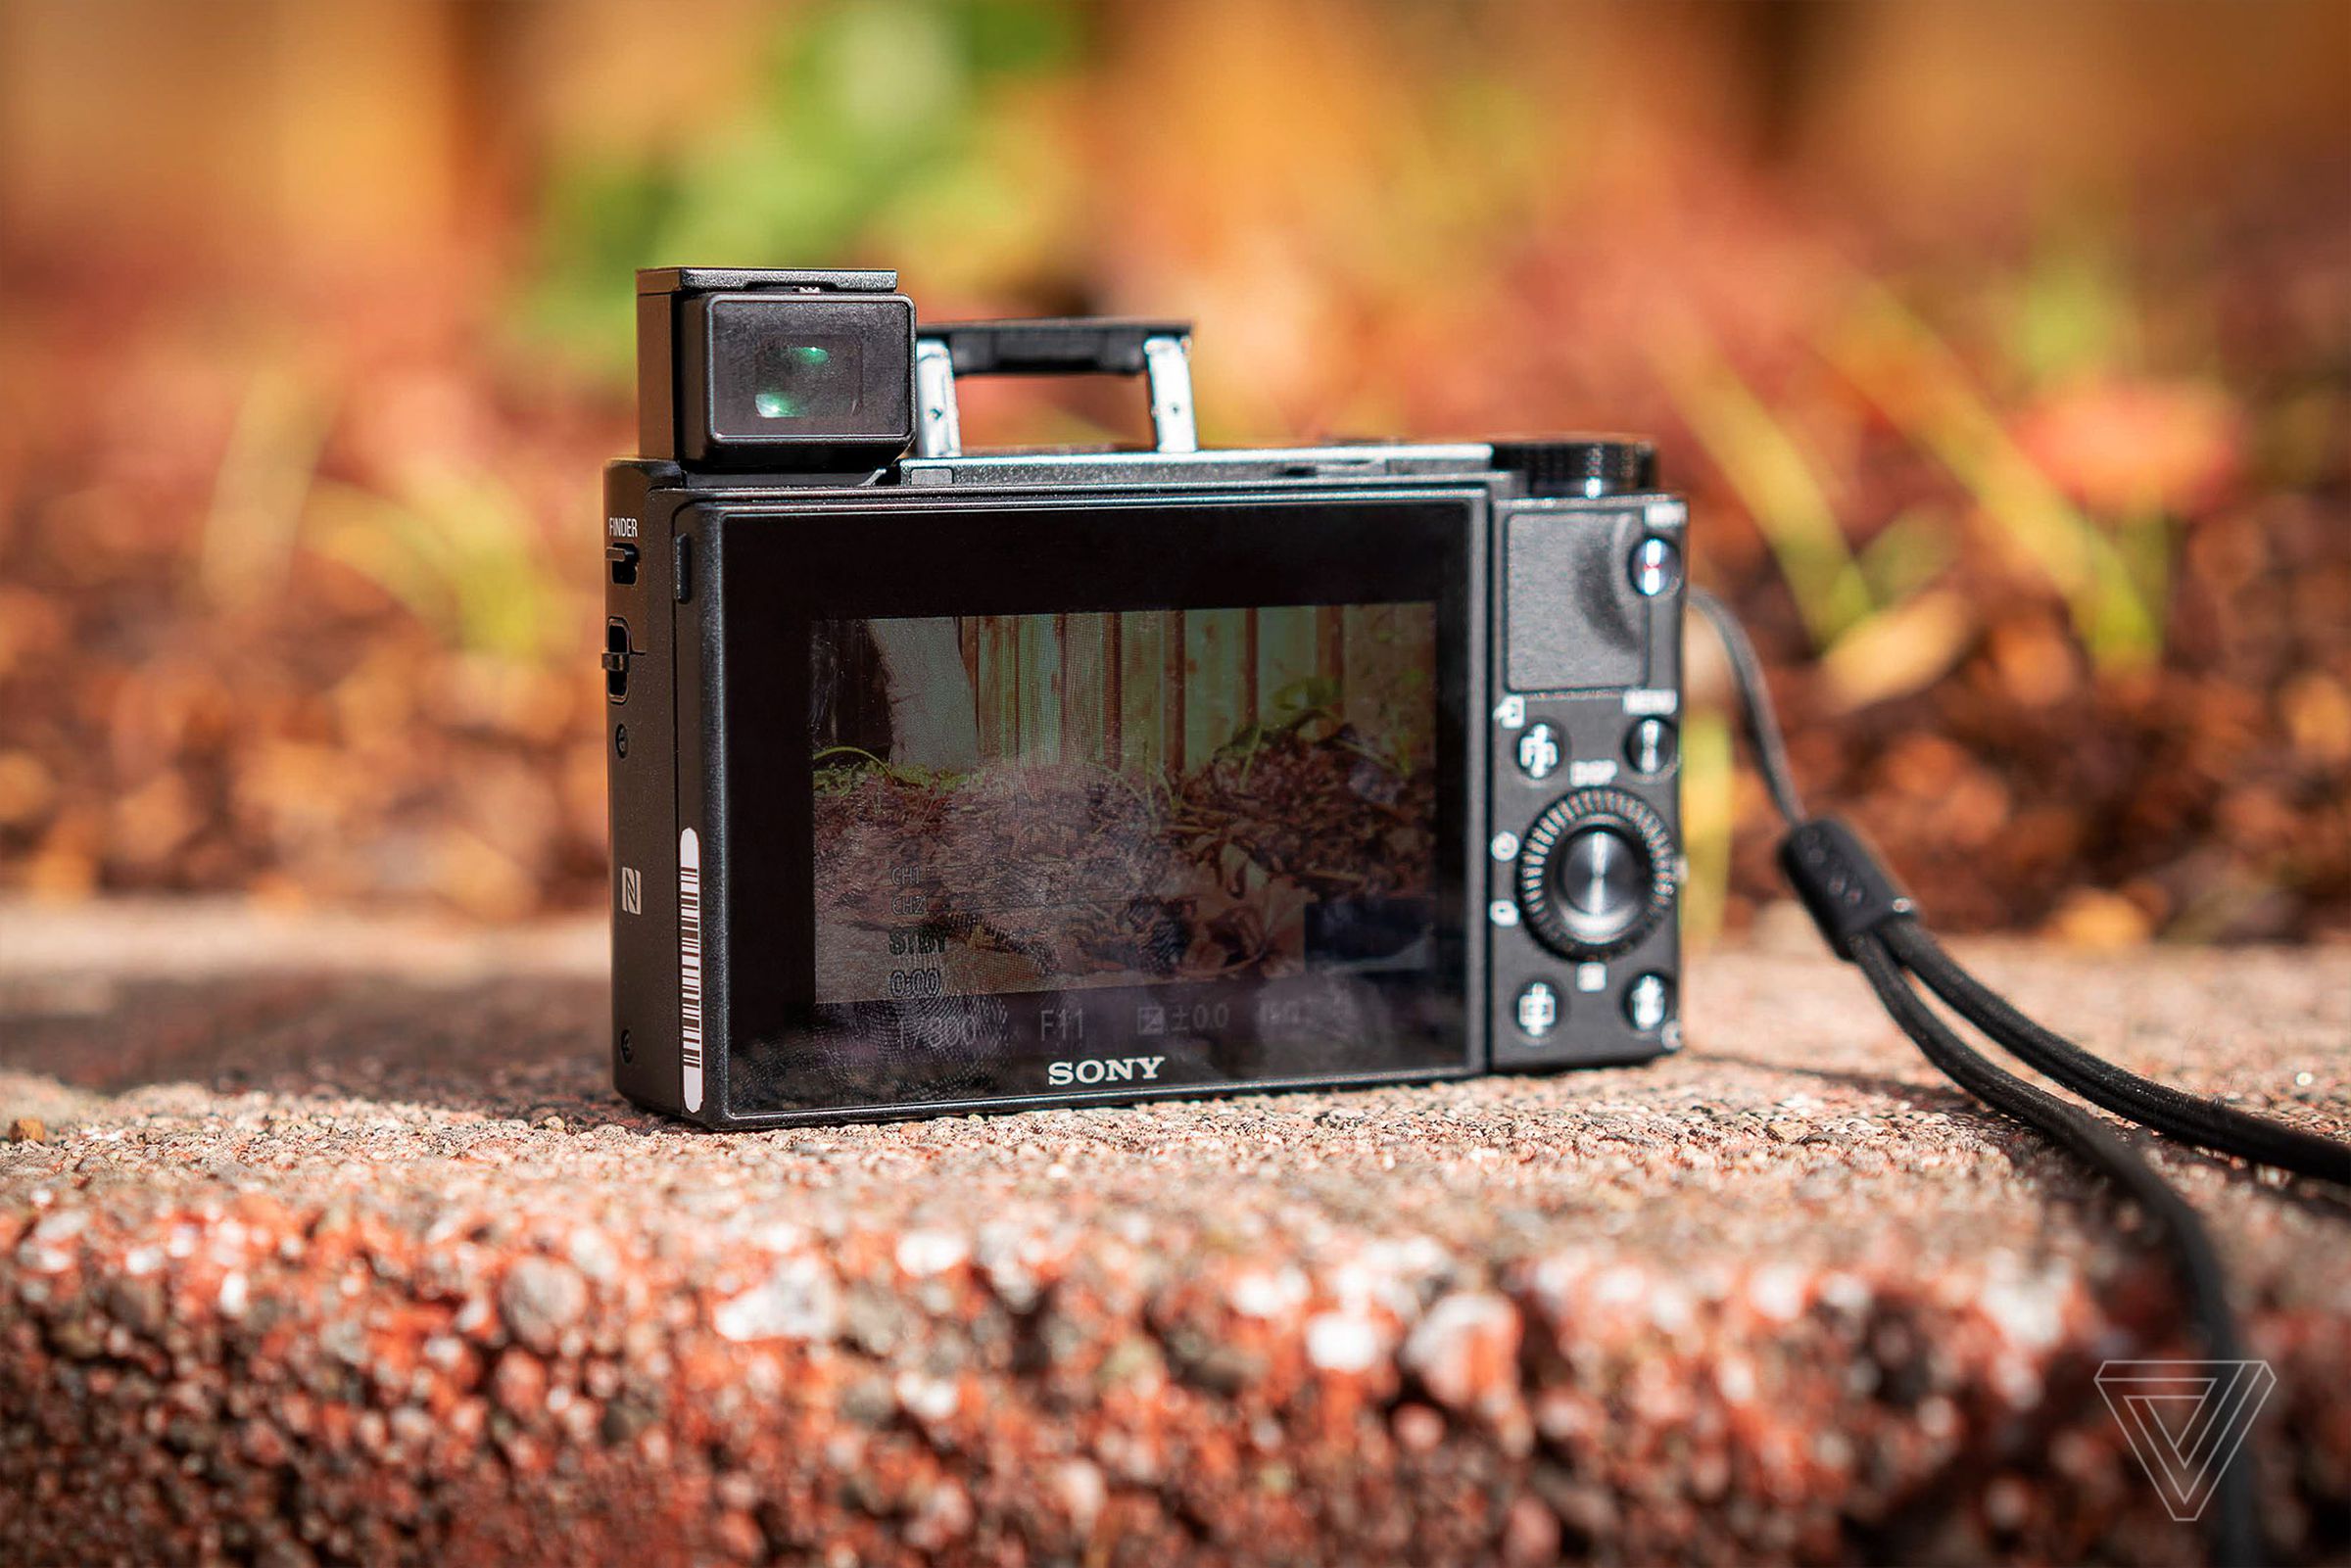 A pop-up viewfinder and pop-up flash give the RX100 flexibility in various shooting environments.